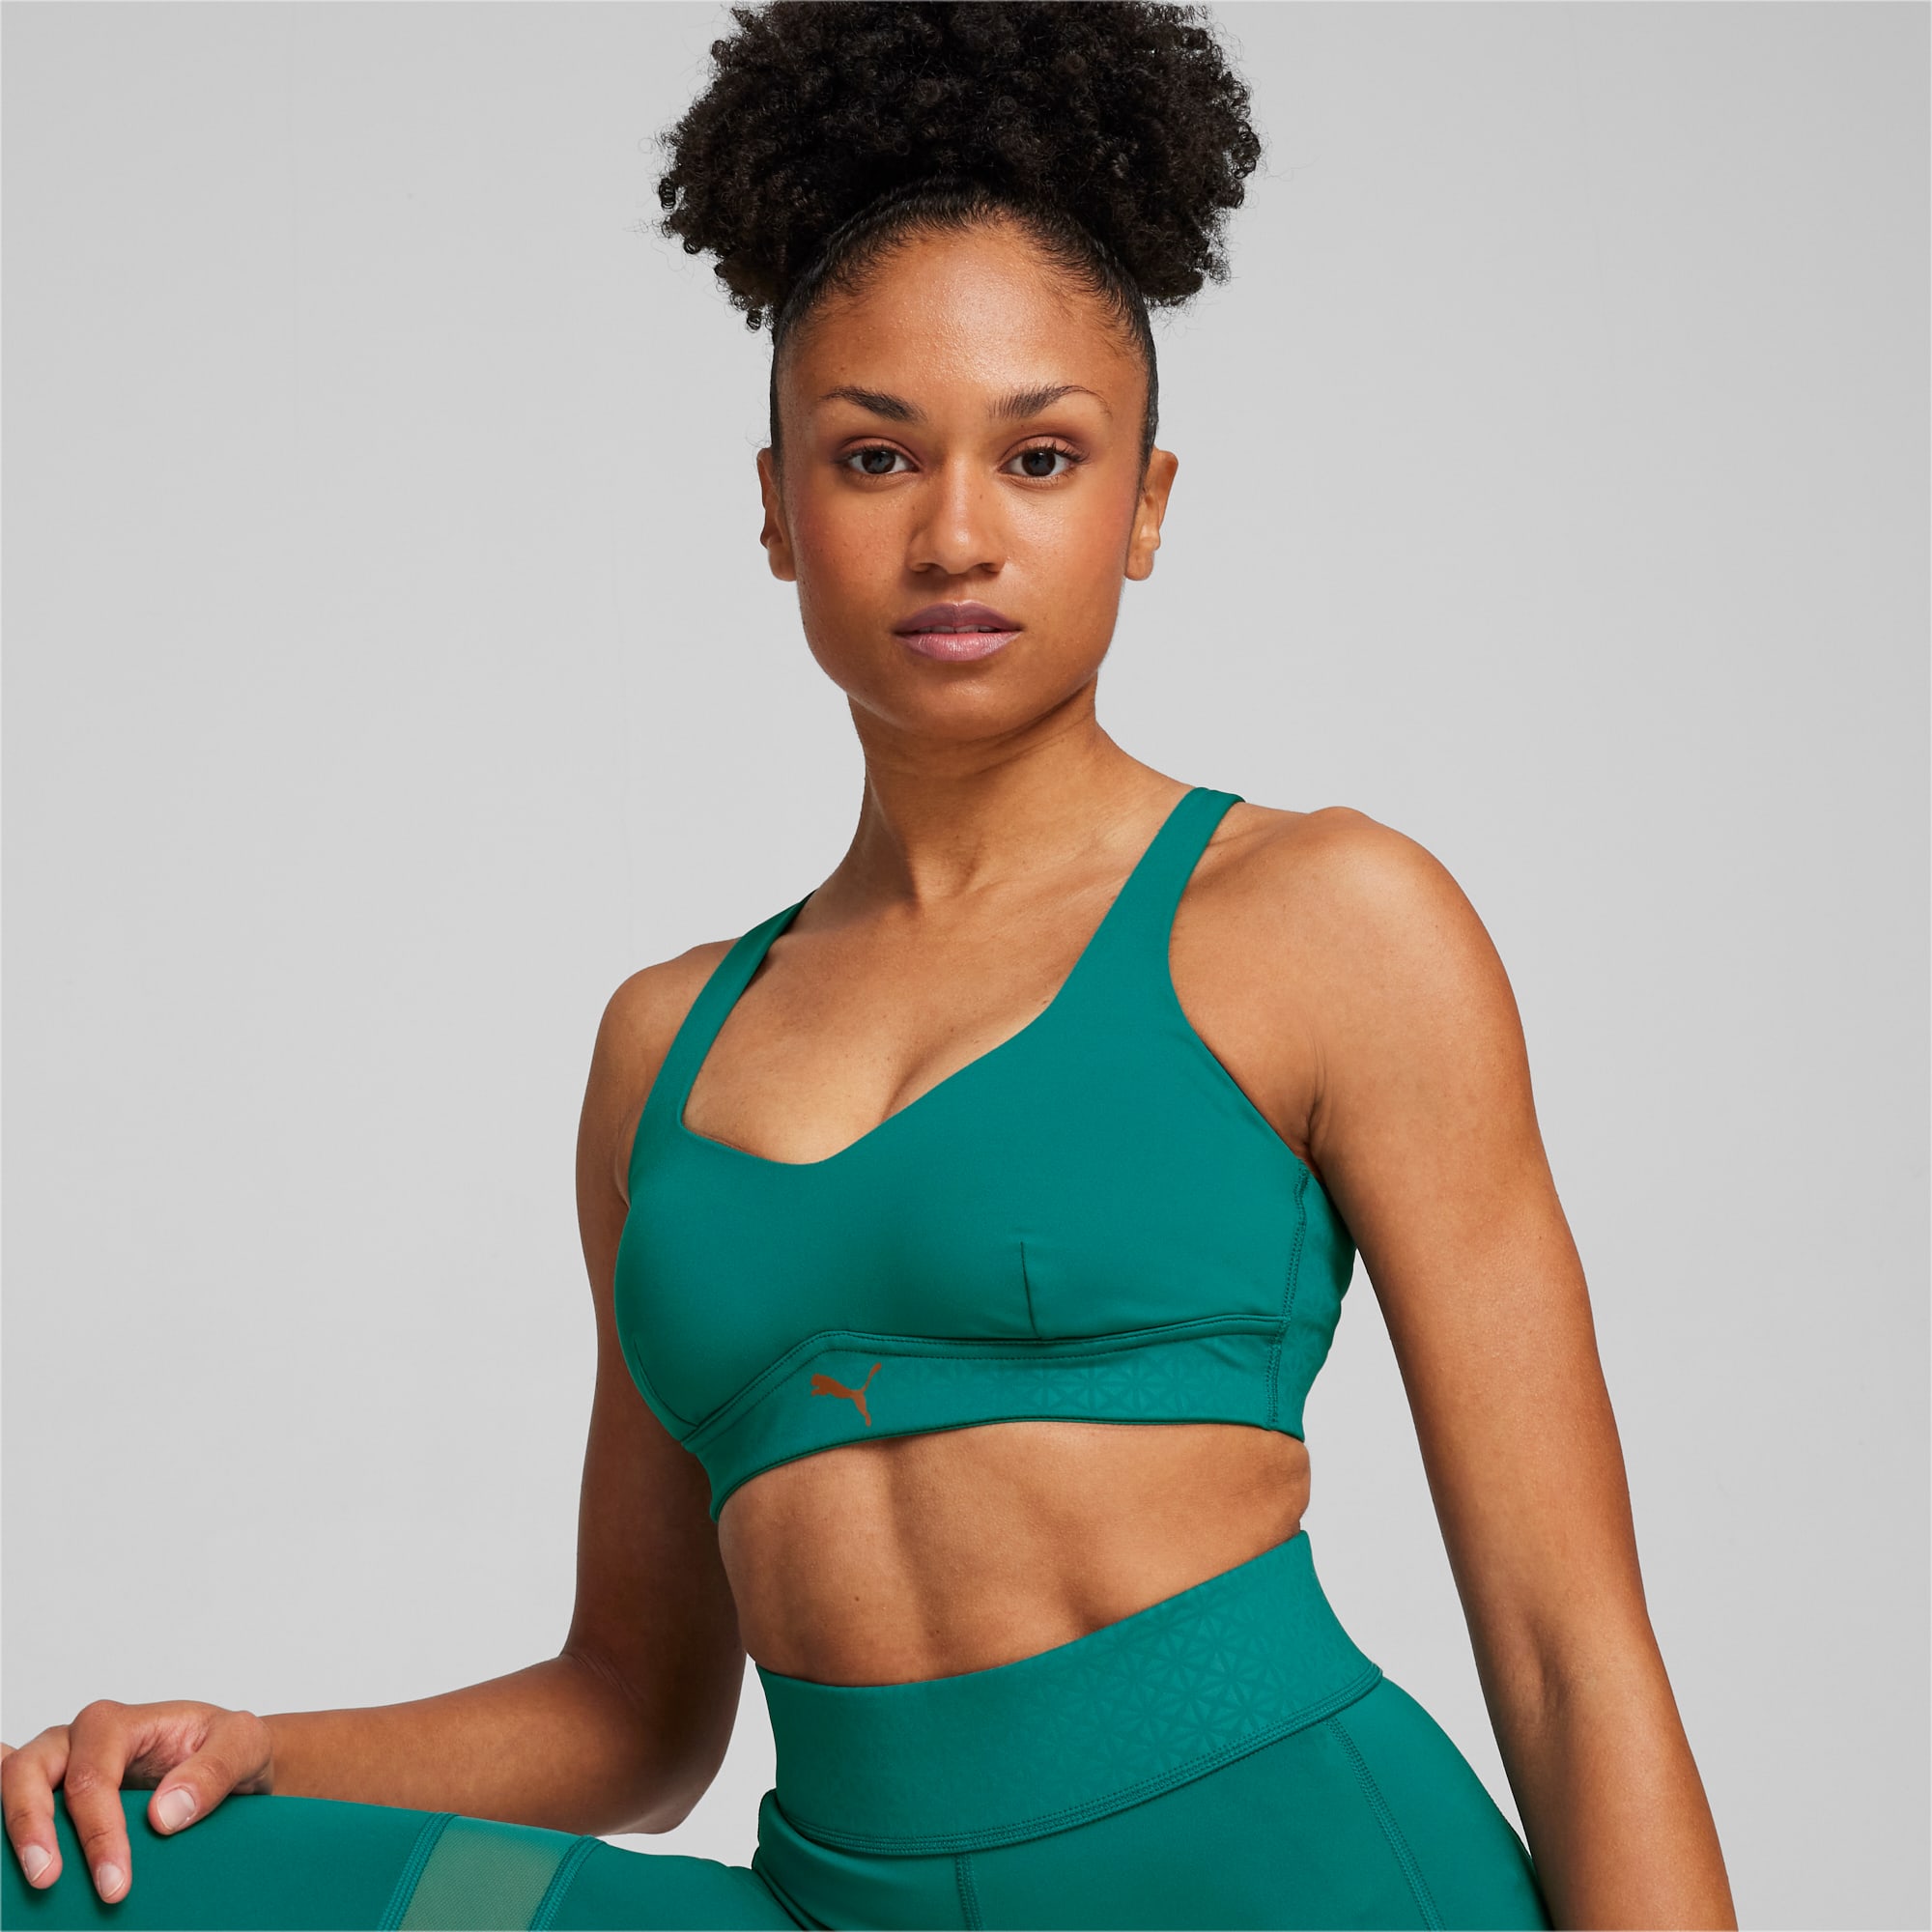 Unleash your inner goddess in our Backless Workout Set! This